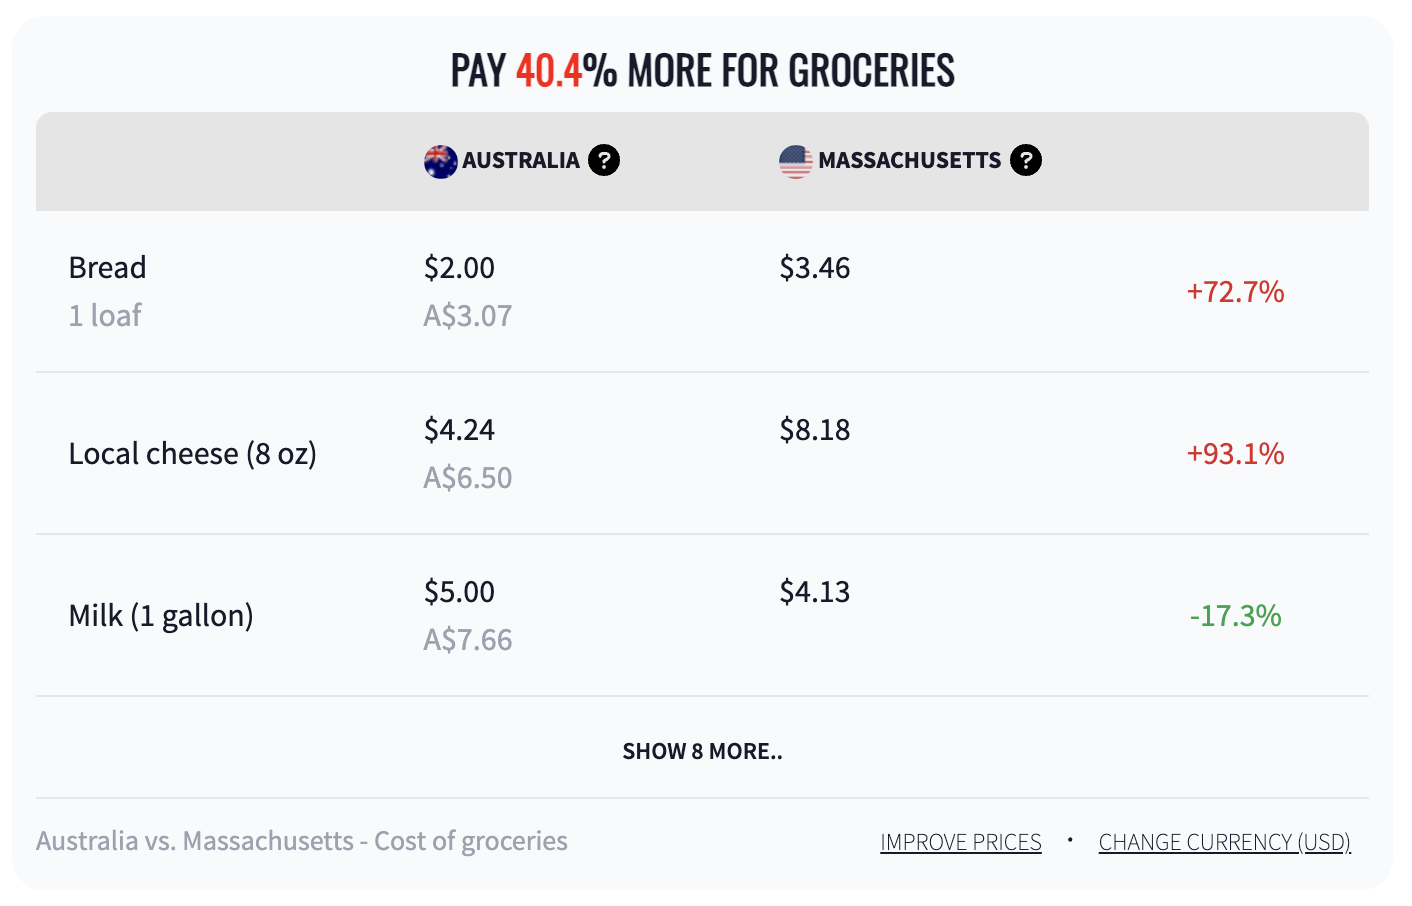 Pay 40.4% more for groceries.